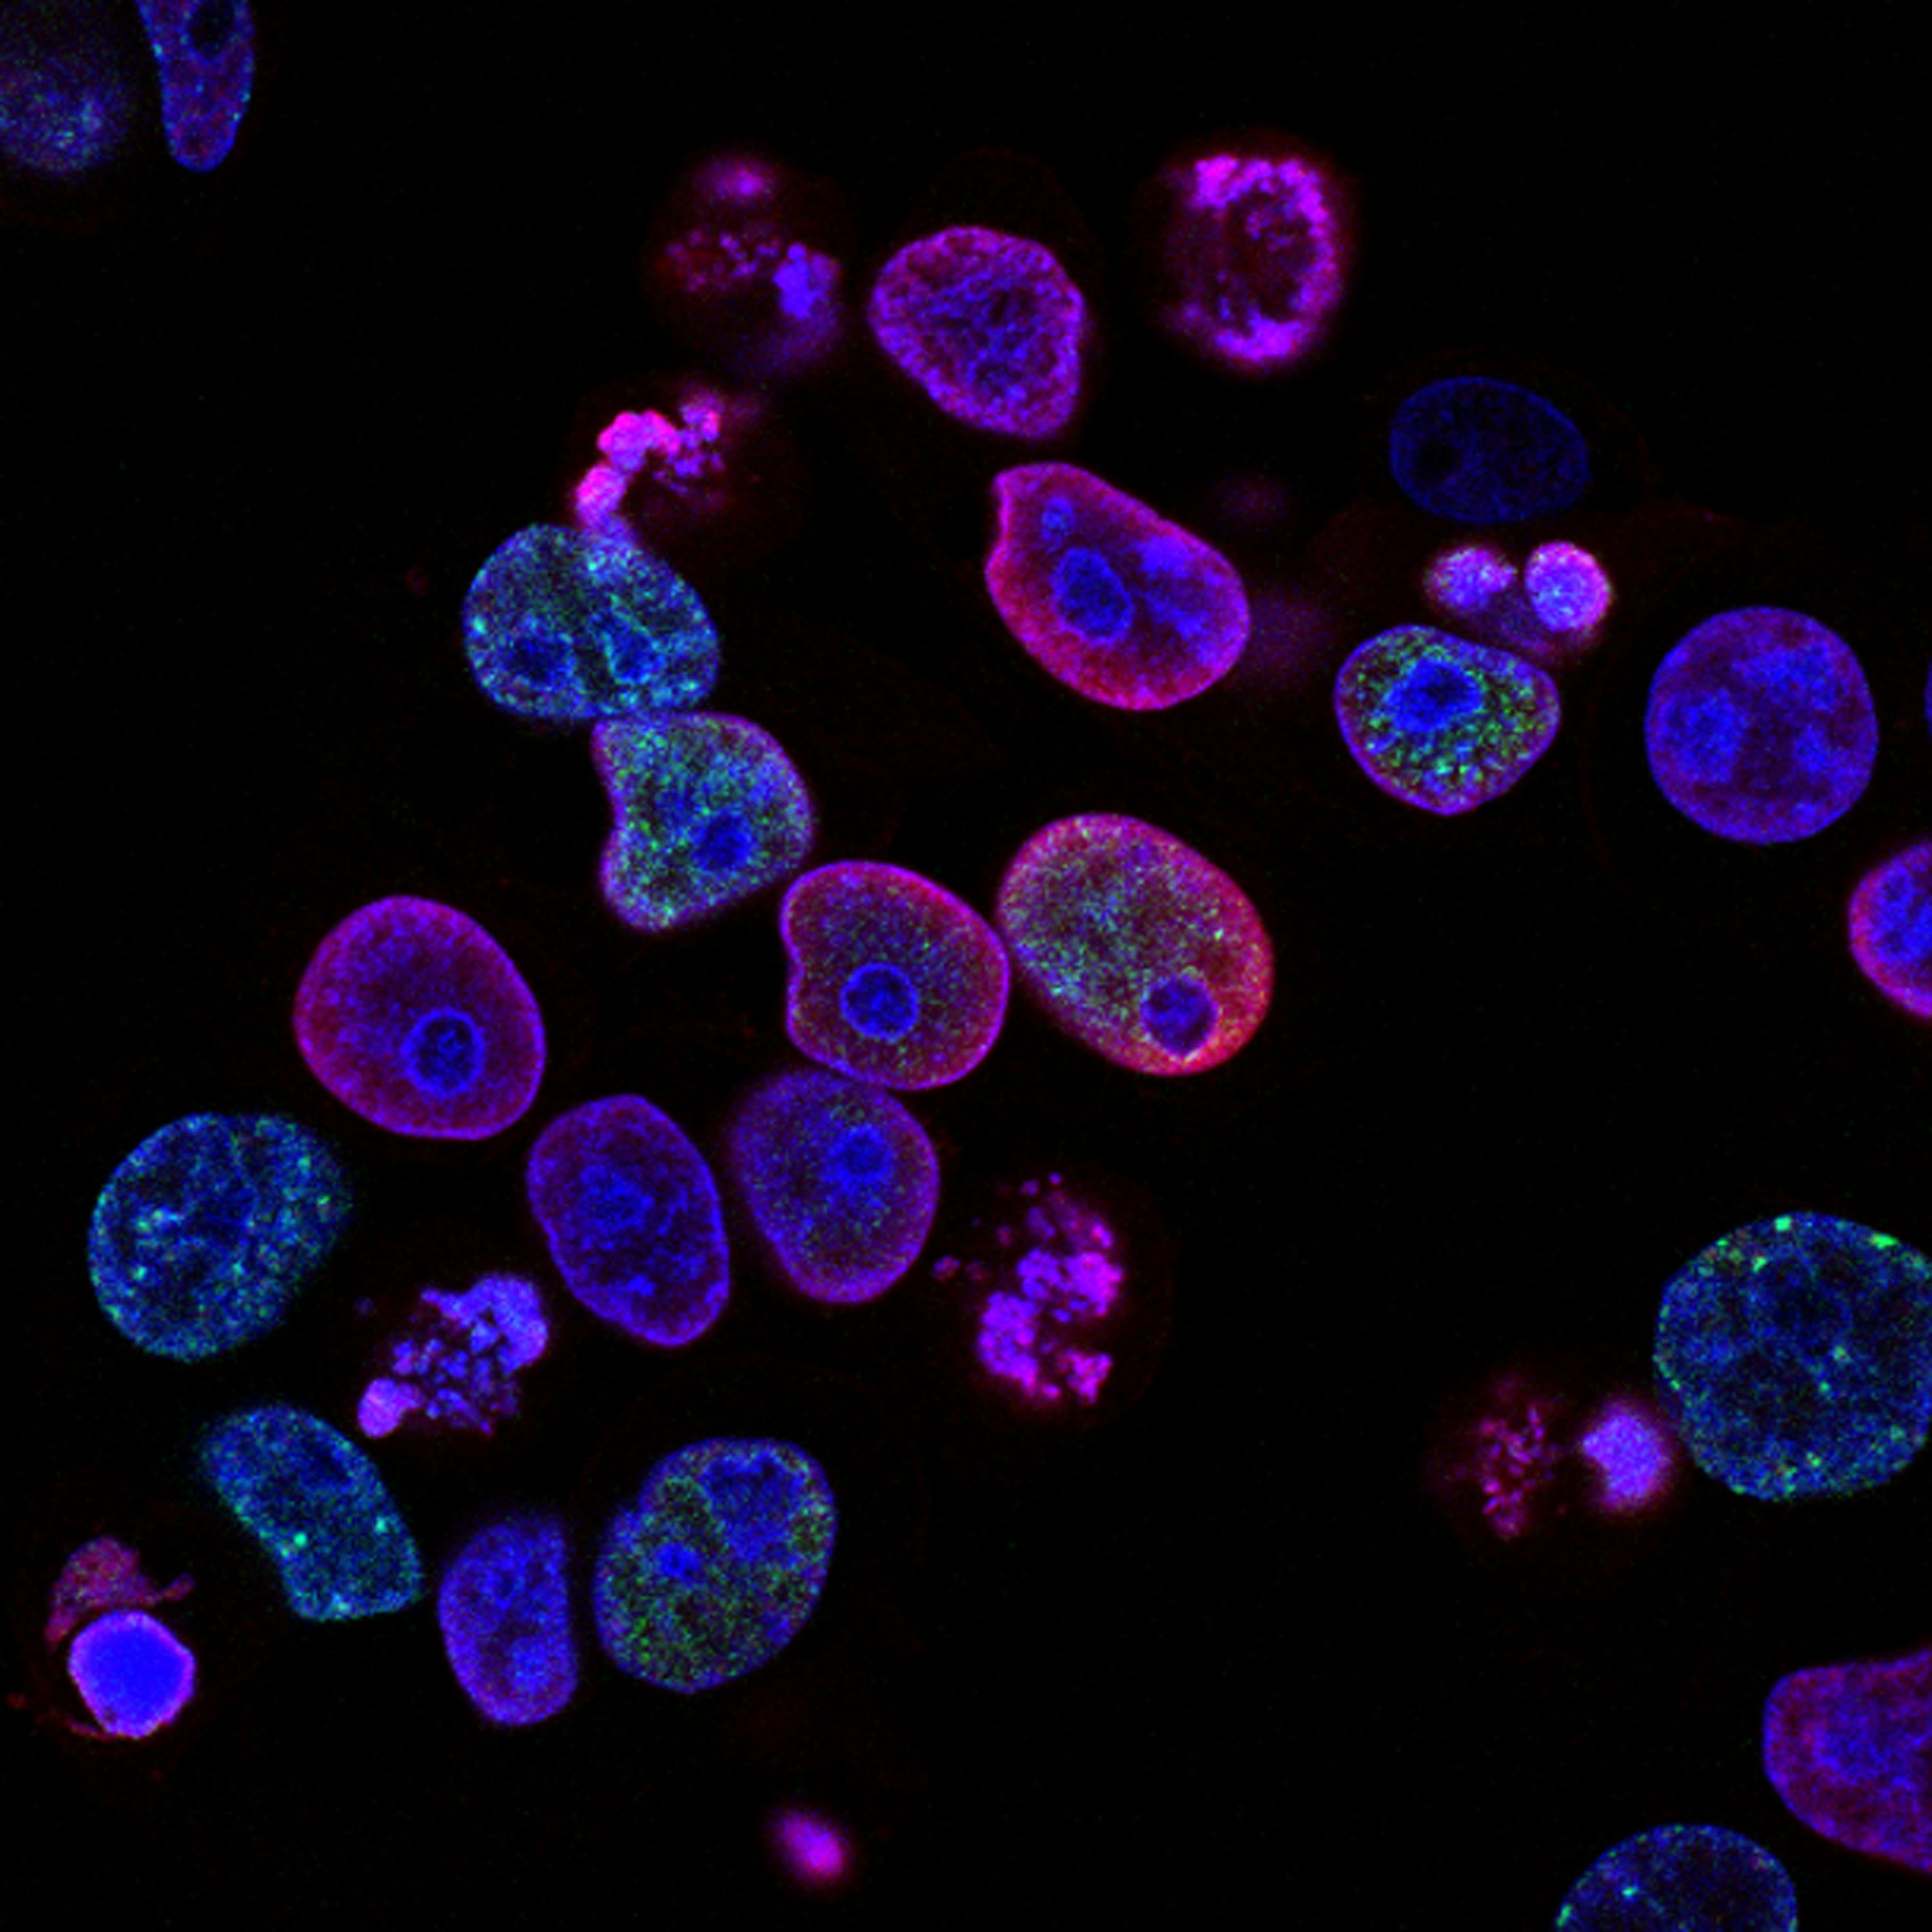 Human colorectal cancer cells - circular shapes in shades of purple, pink, blue and green, on a black background